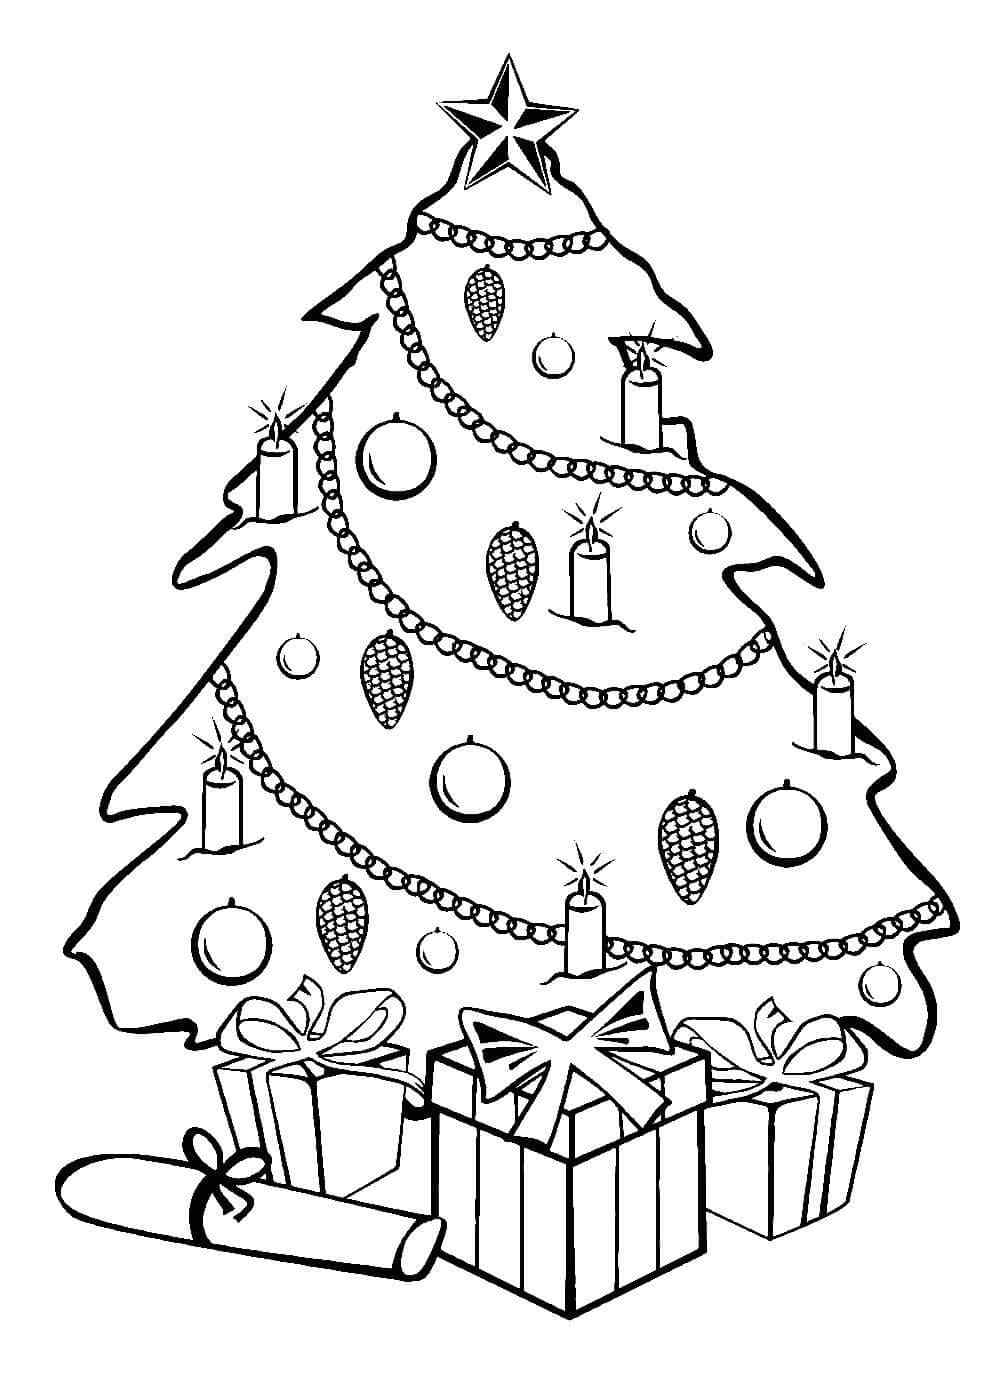 Christmas Gift Under The Tree Coloring Page